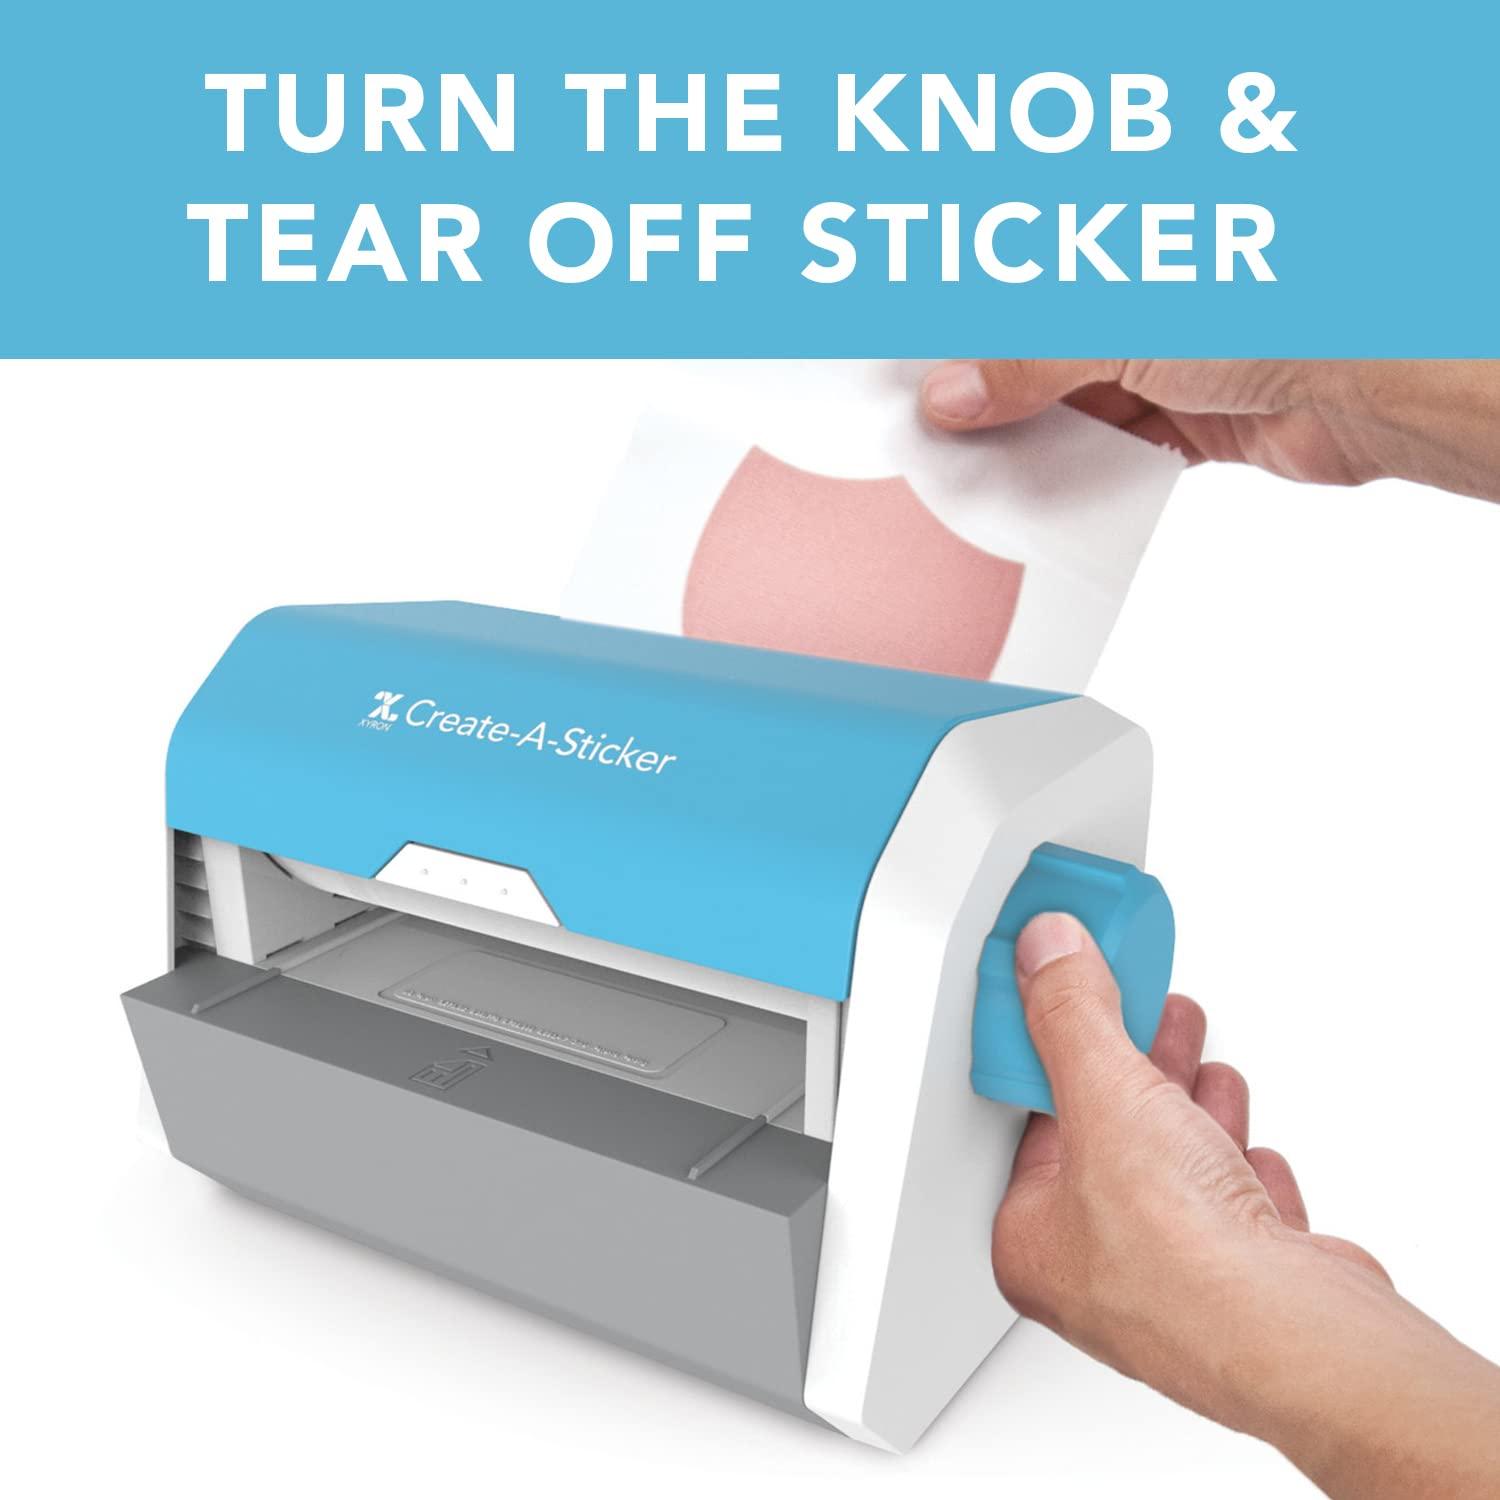 10 Reasons Why You Need a Xyron Sticker Maker